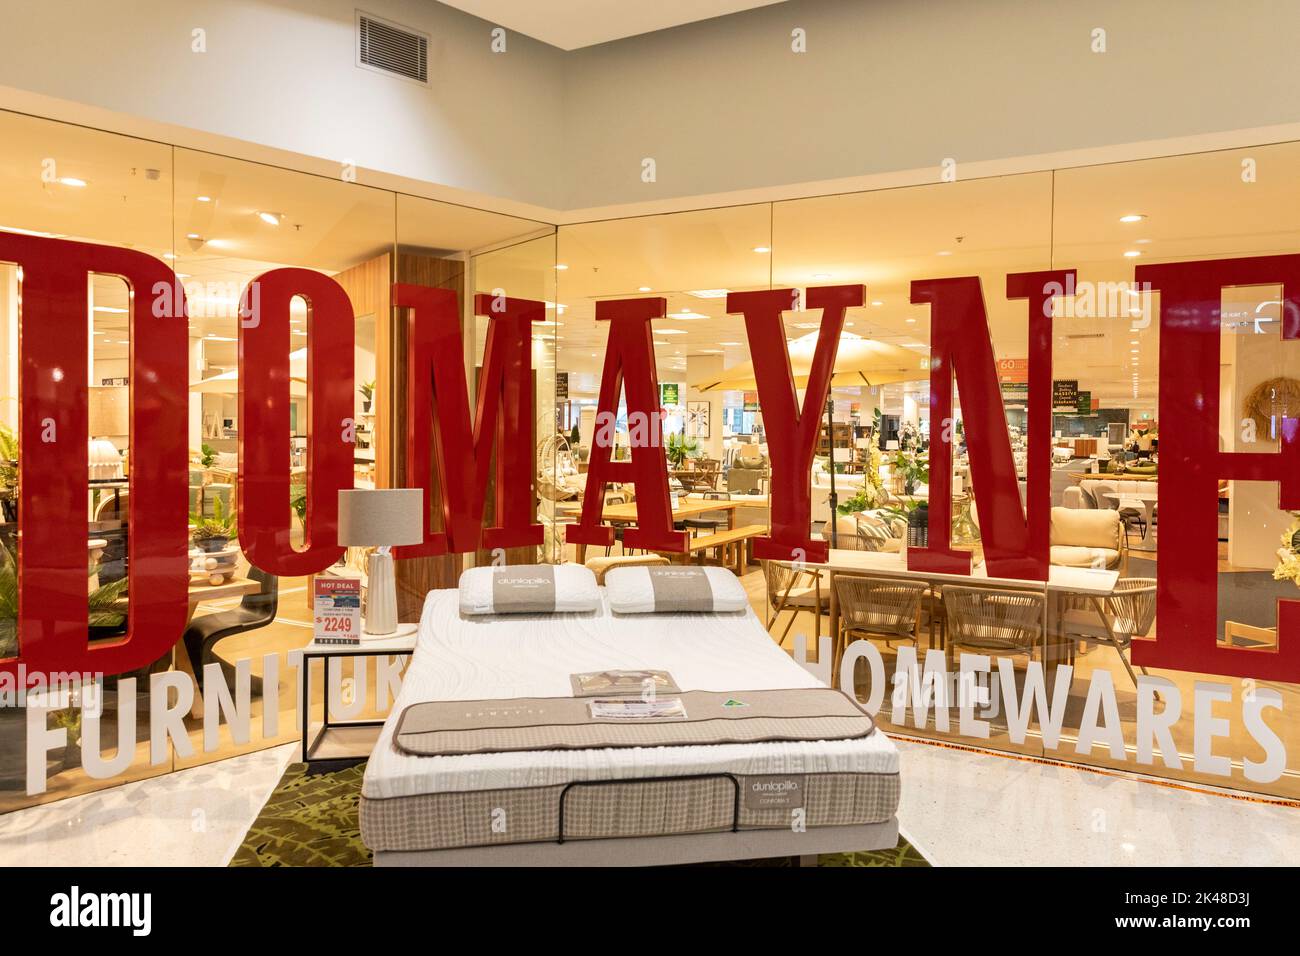 Domayne furniture store selling homewares and beds and furniture,Belrose shopping mall,Sydney,NSW,Australia Stock Photo